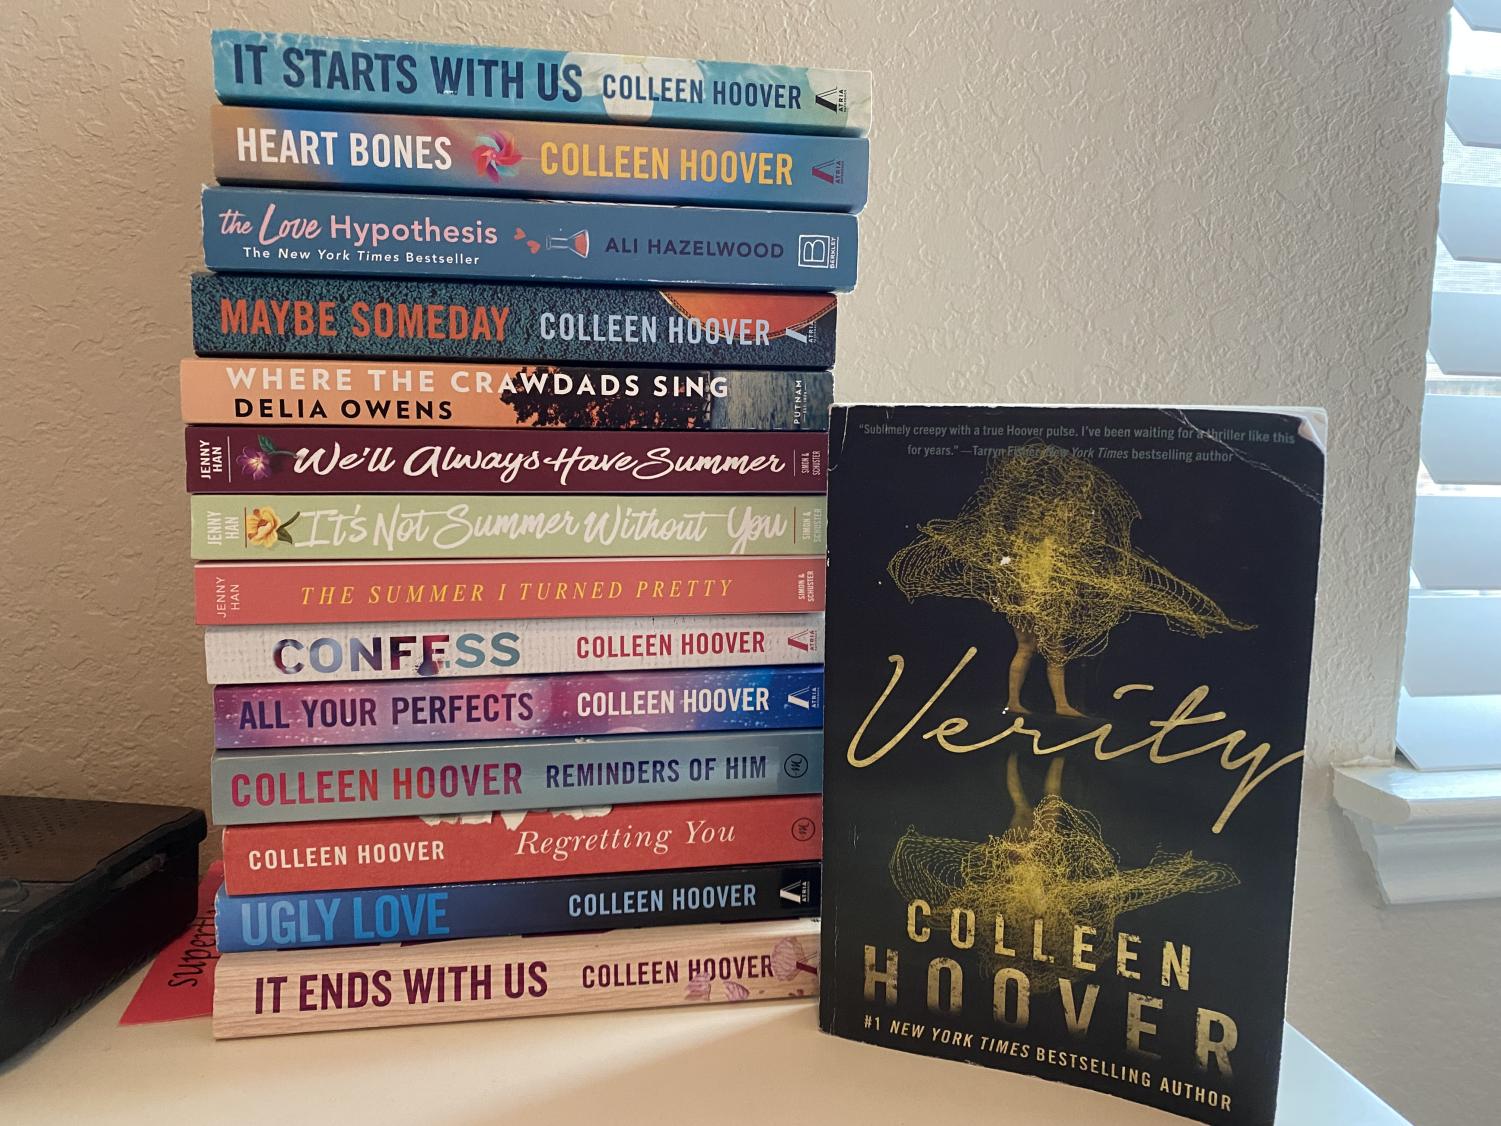 Review: Verity by Colleen Hoover